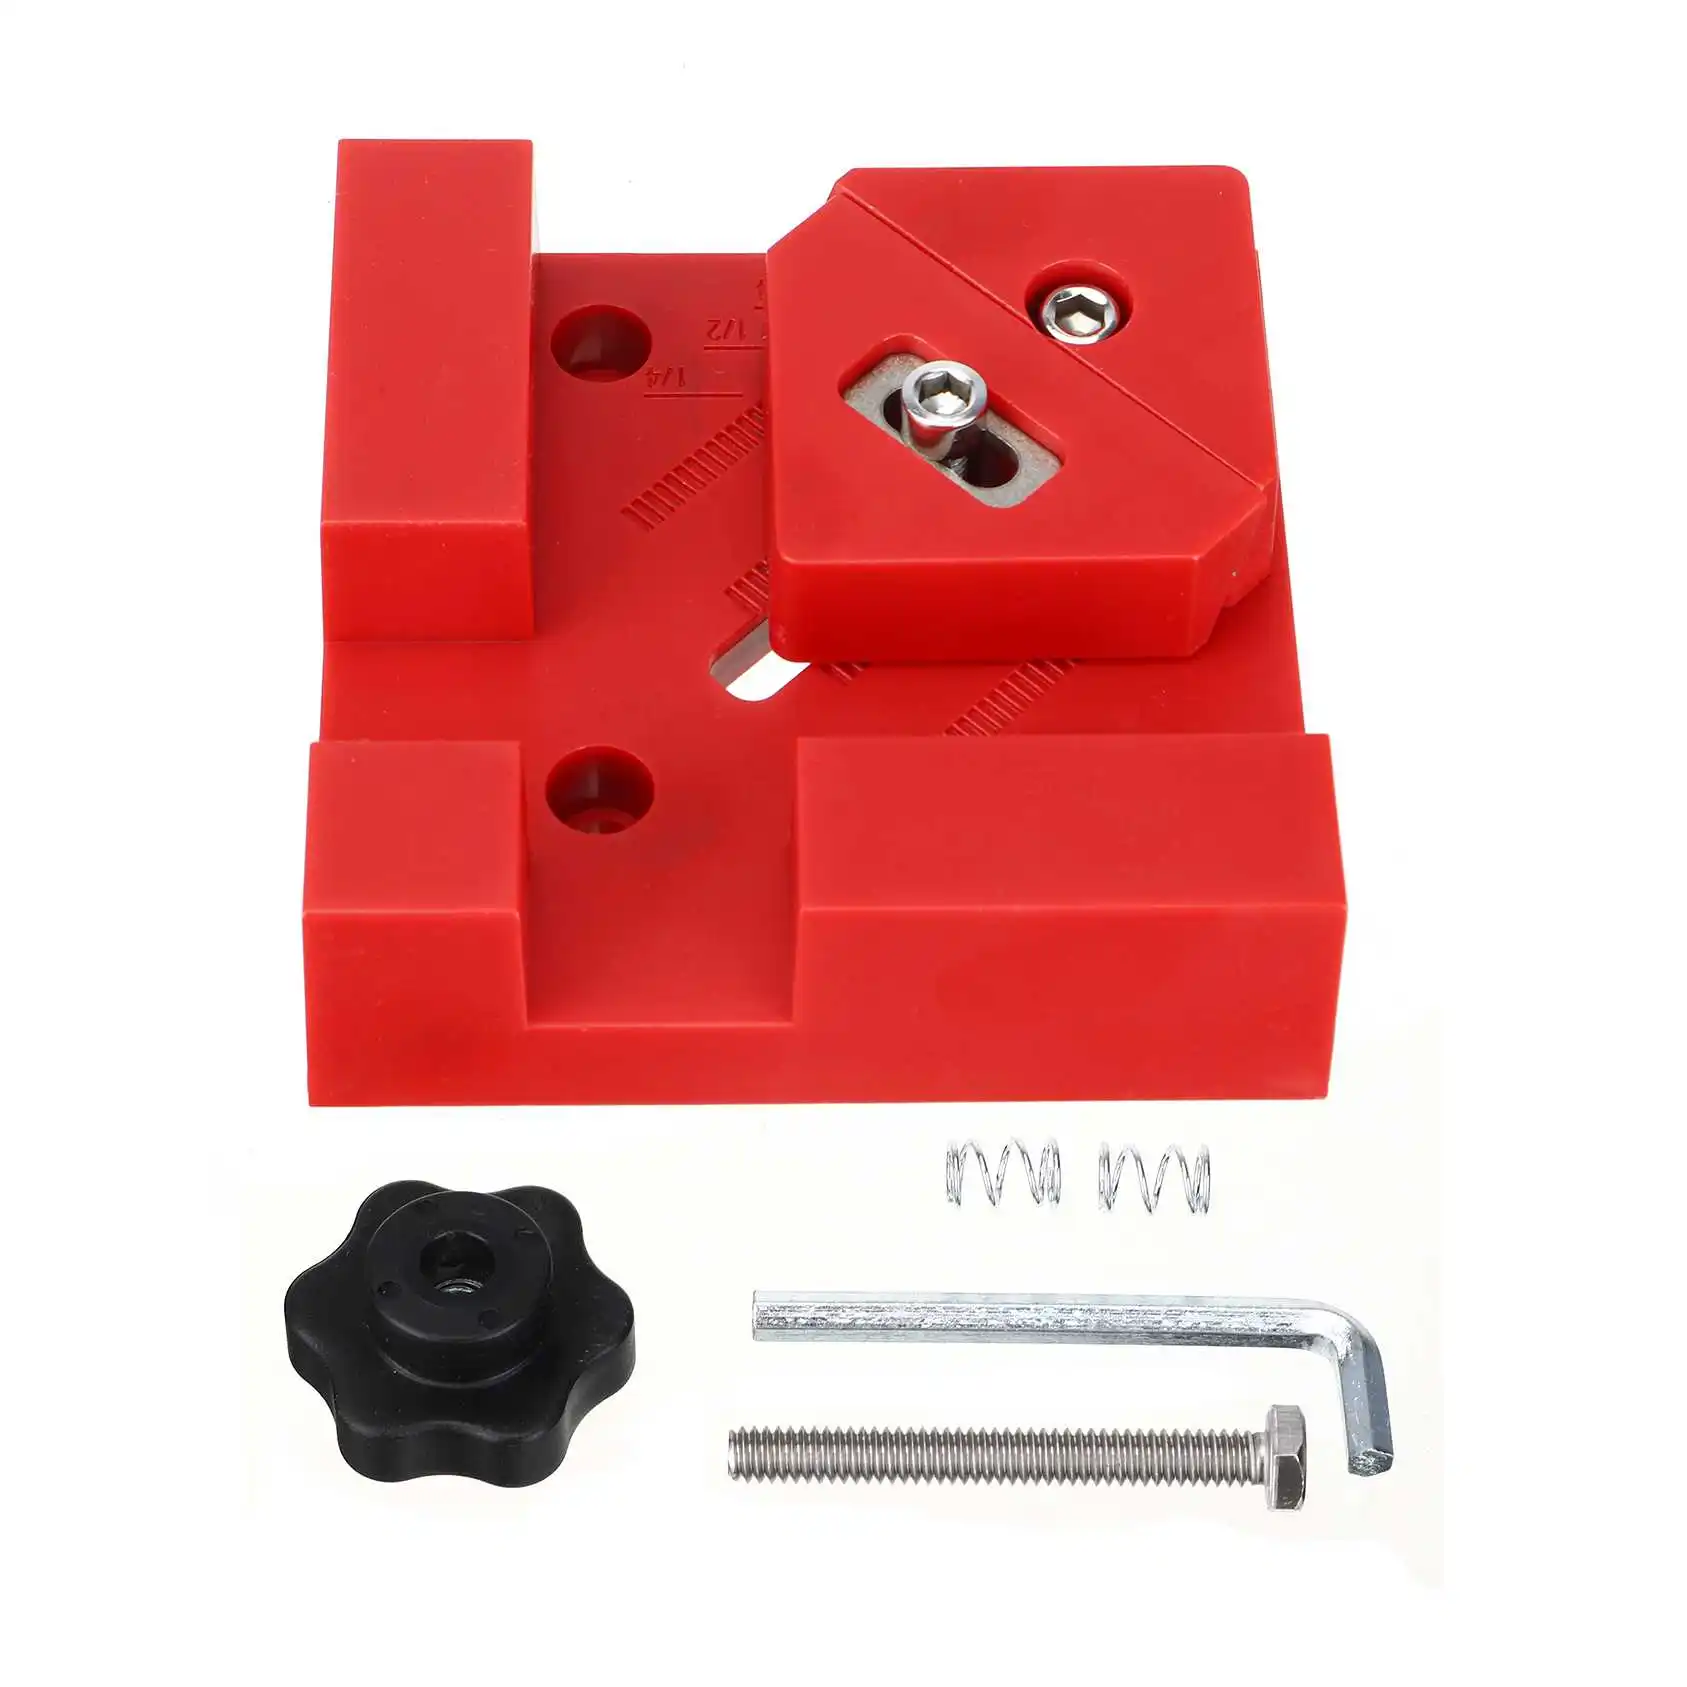 10x10cm 90 Degree Right Angle Clamp Spring Clamp Adjustable Swing Angle Clamp Frame Cabinet Clip Woodworking Tool